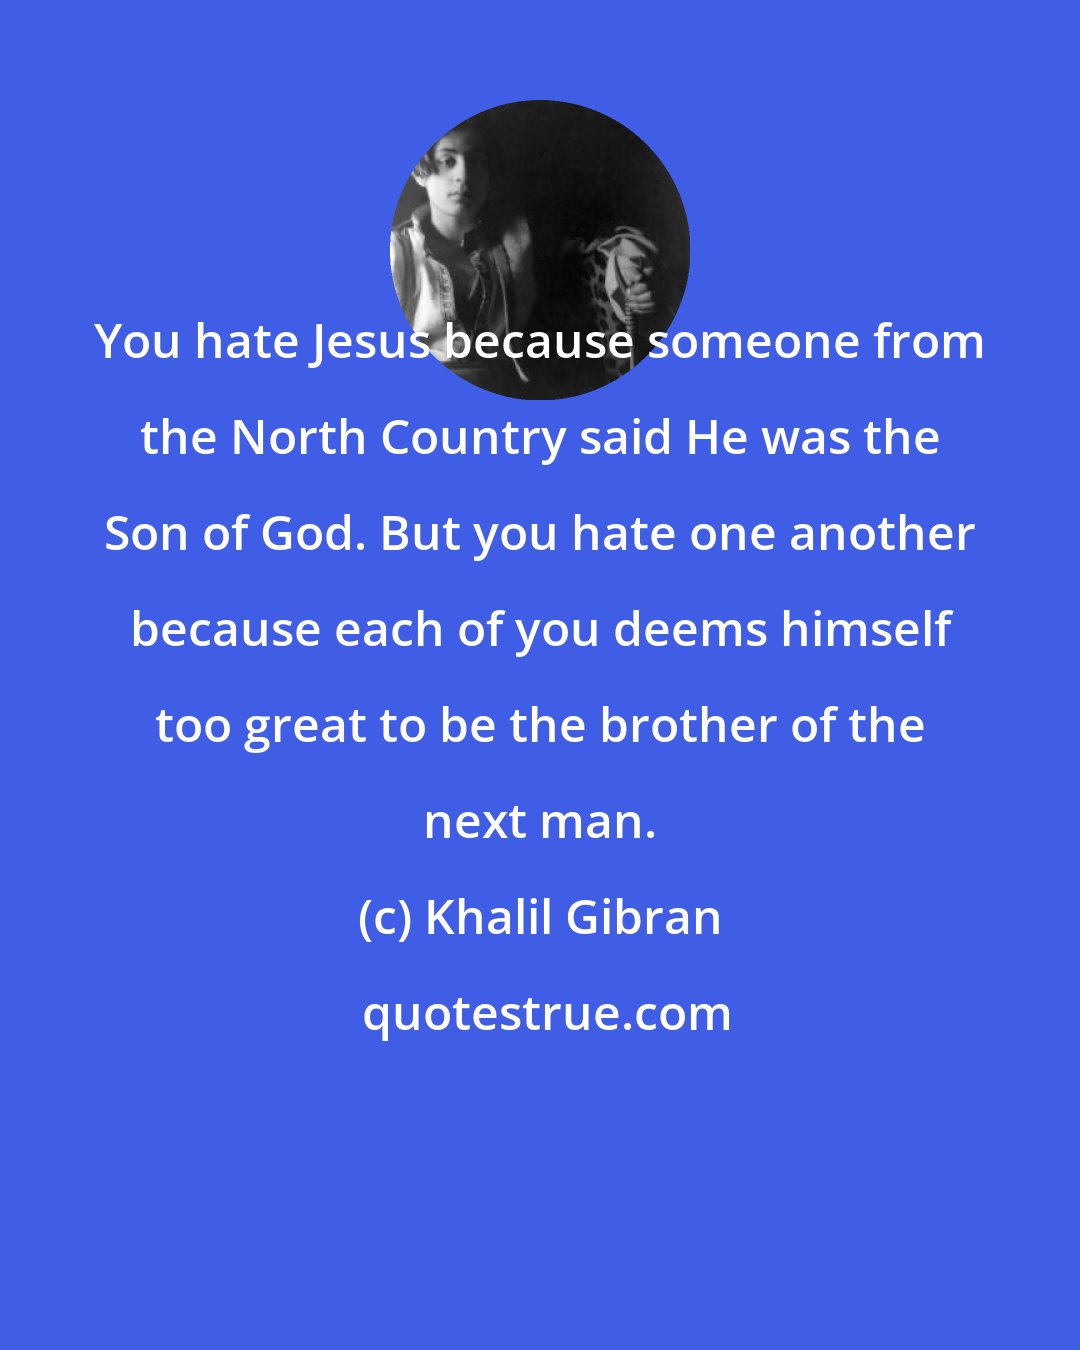 Khalil Gibran: You hate Jesus because someone from the North Country said He was the Son of God. But you hate one another because each of you deems himself too great to be the brother of the next man.